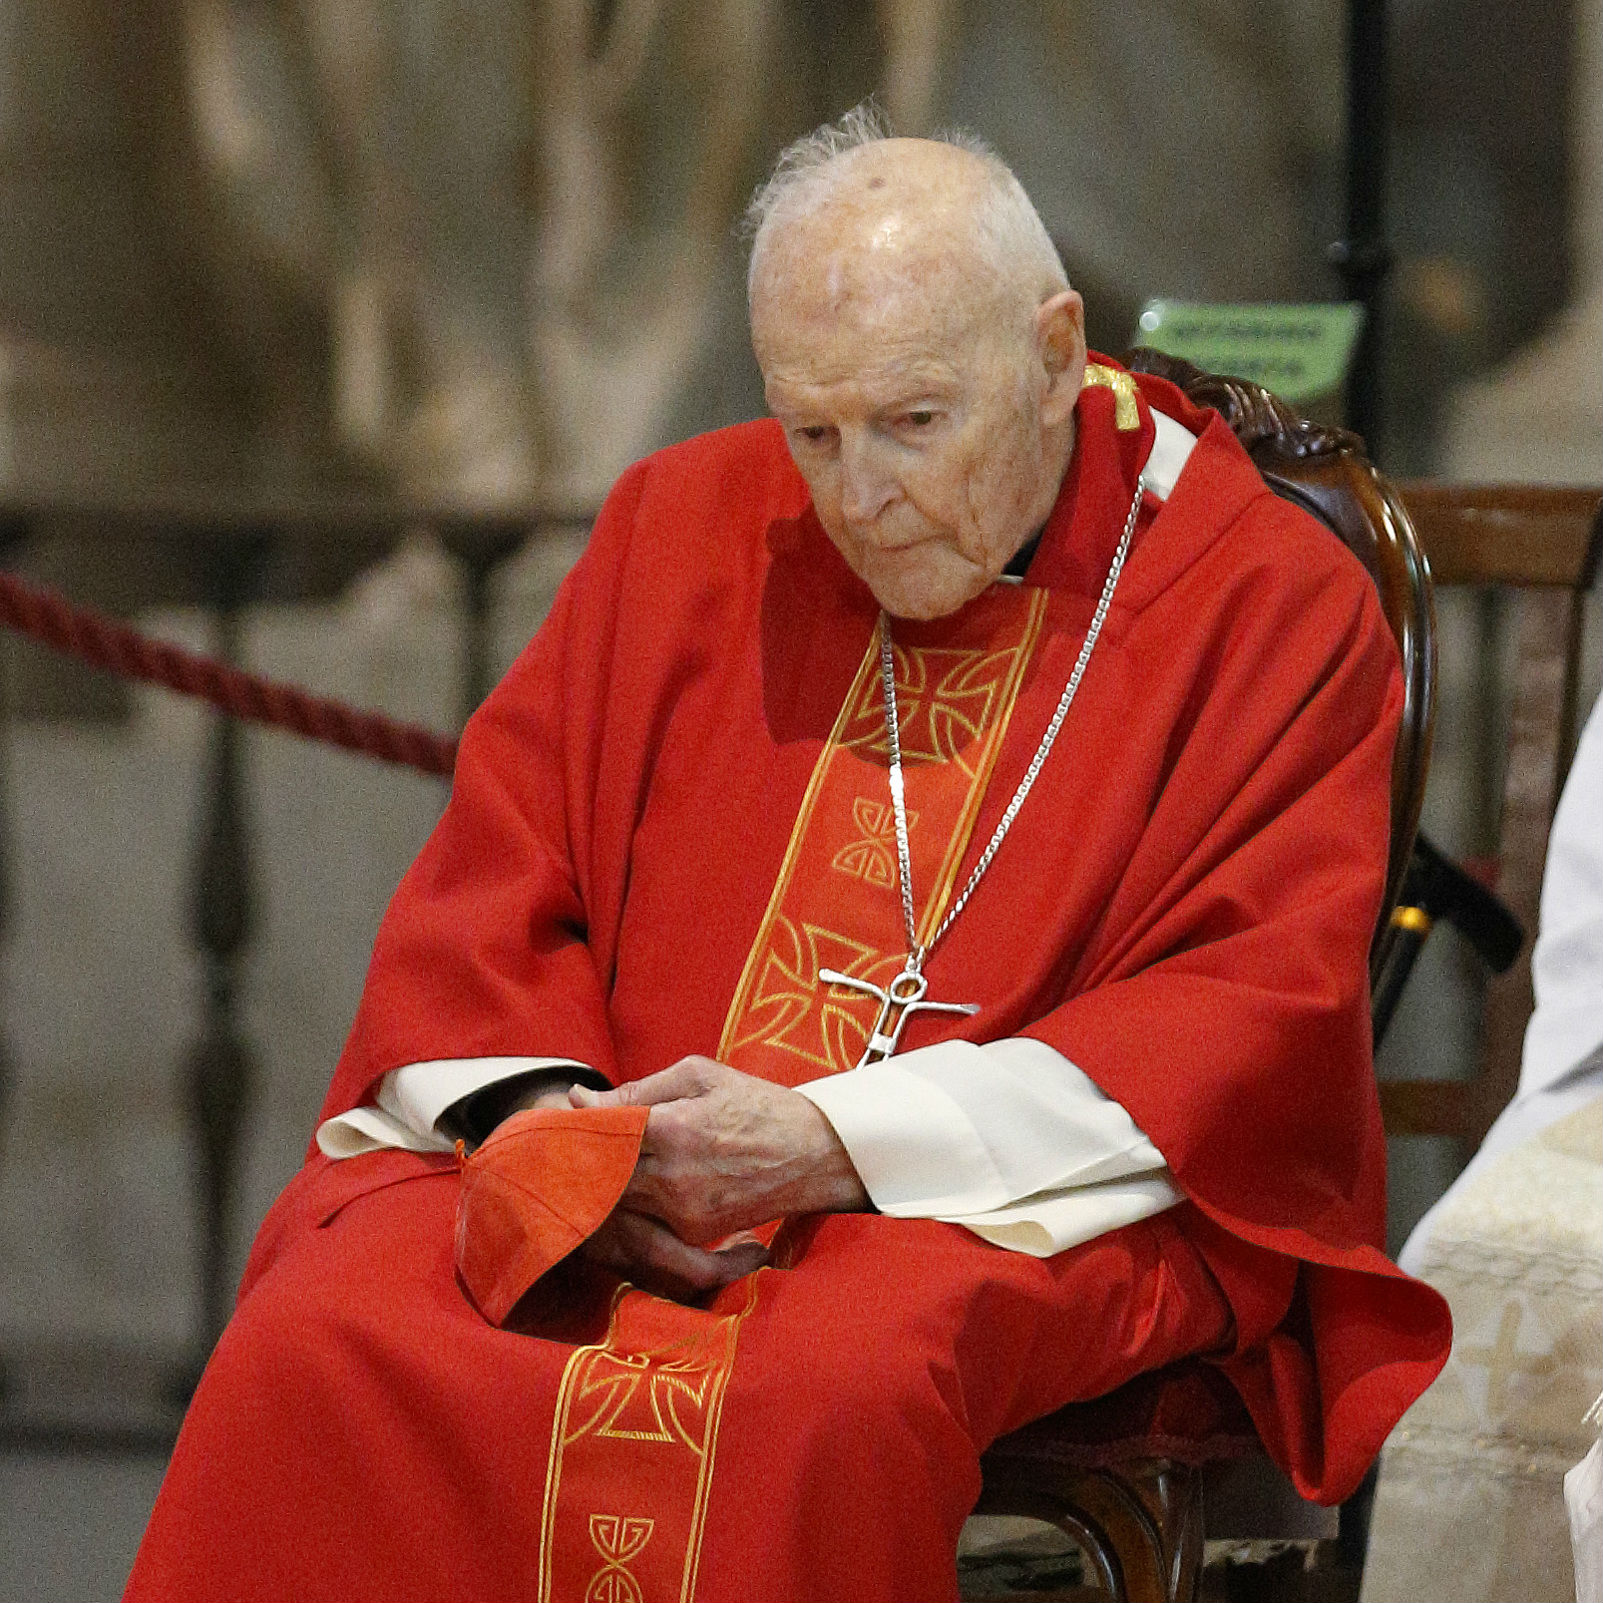 McCarrick removed from priesthood after Vatican find him guilty of abuse